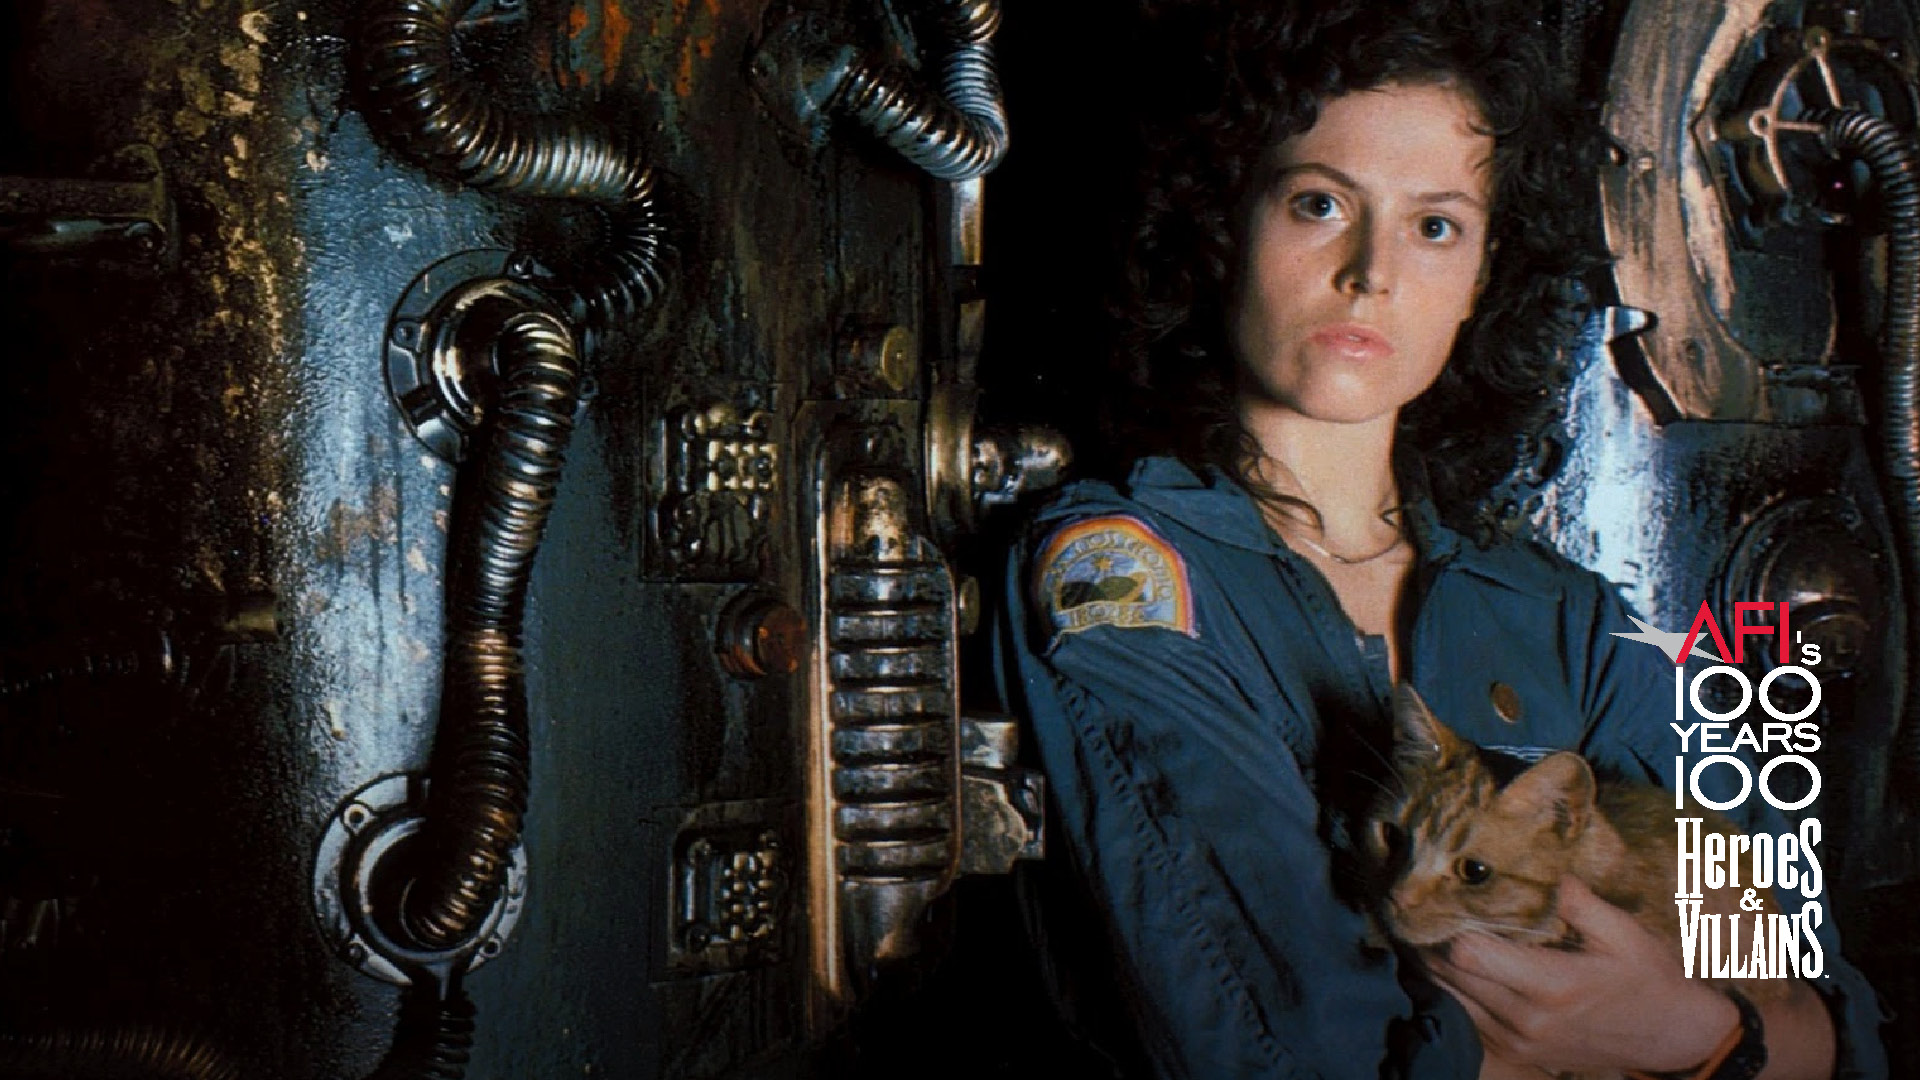 Still image of Sigourney Weaver as Ripley from the film ALIEN